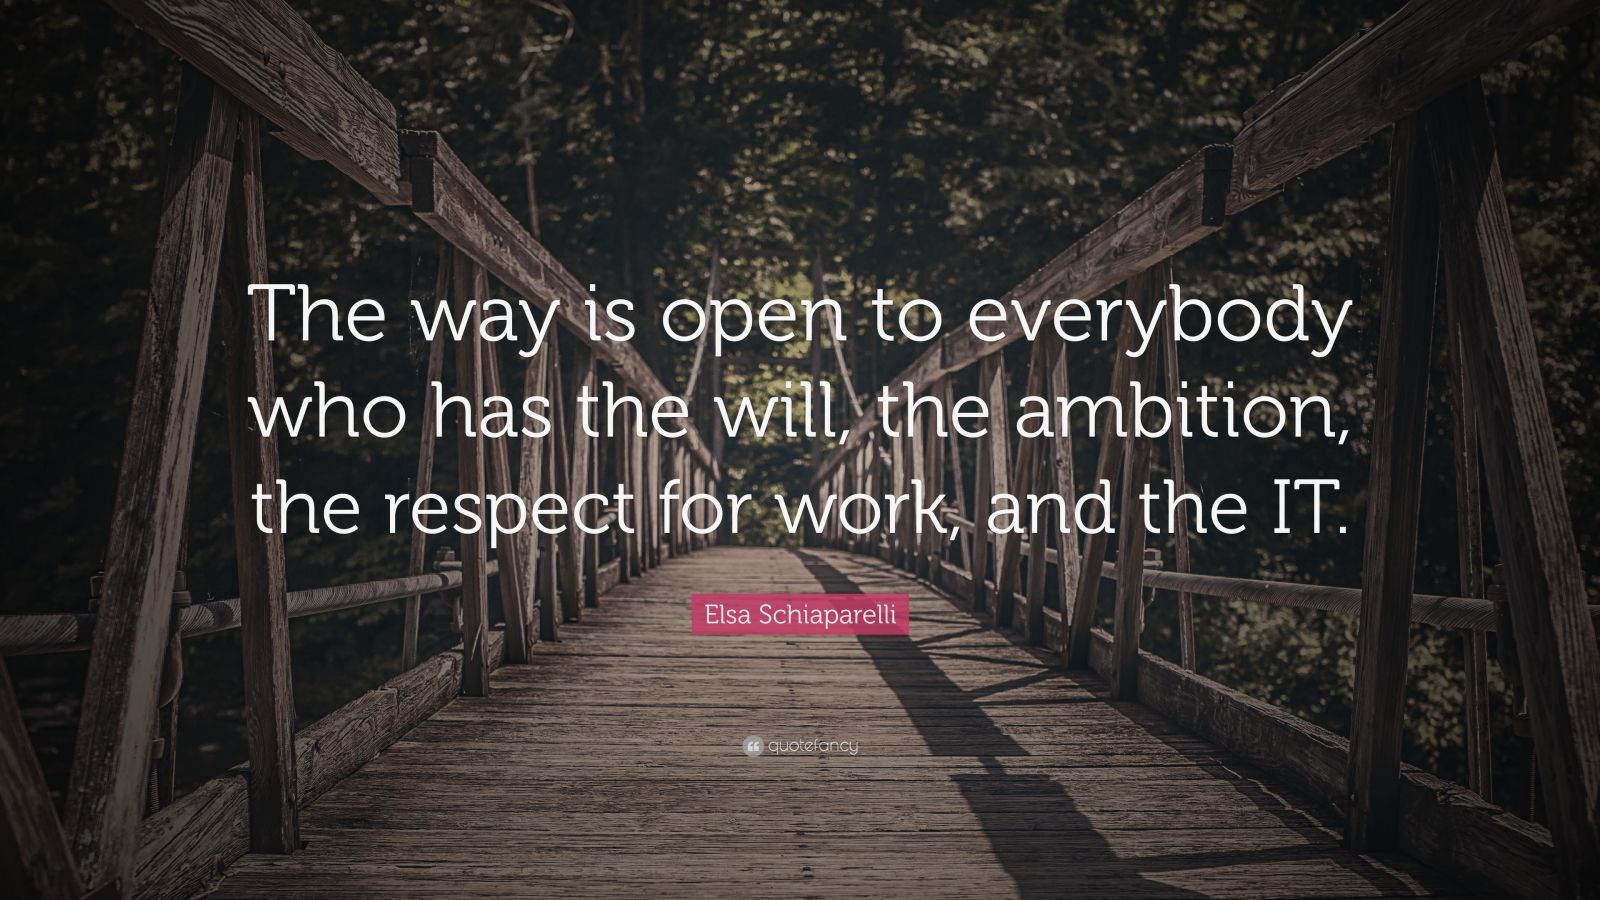 Elsa Schiaparelli Quote: “The way is open to everybody who has the will ...